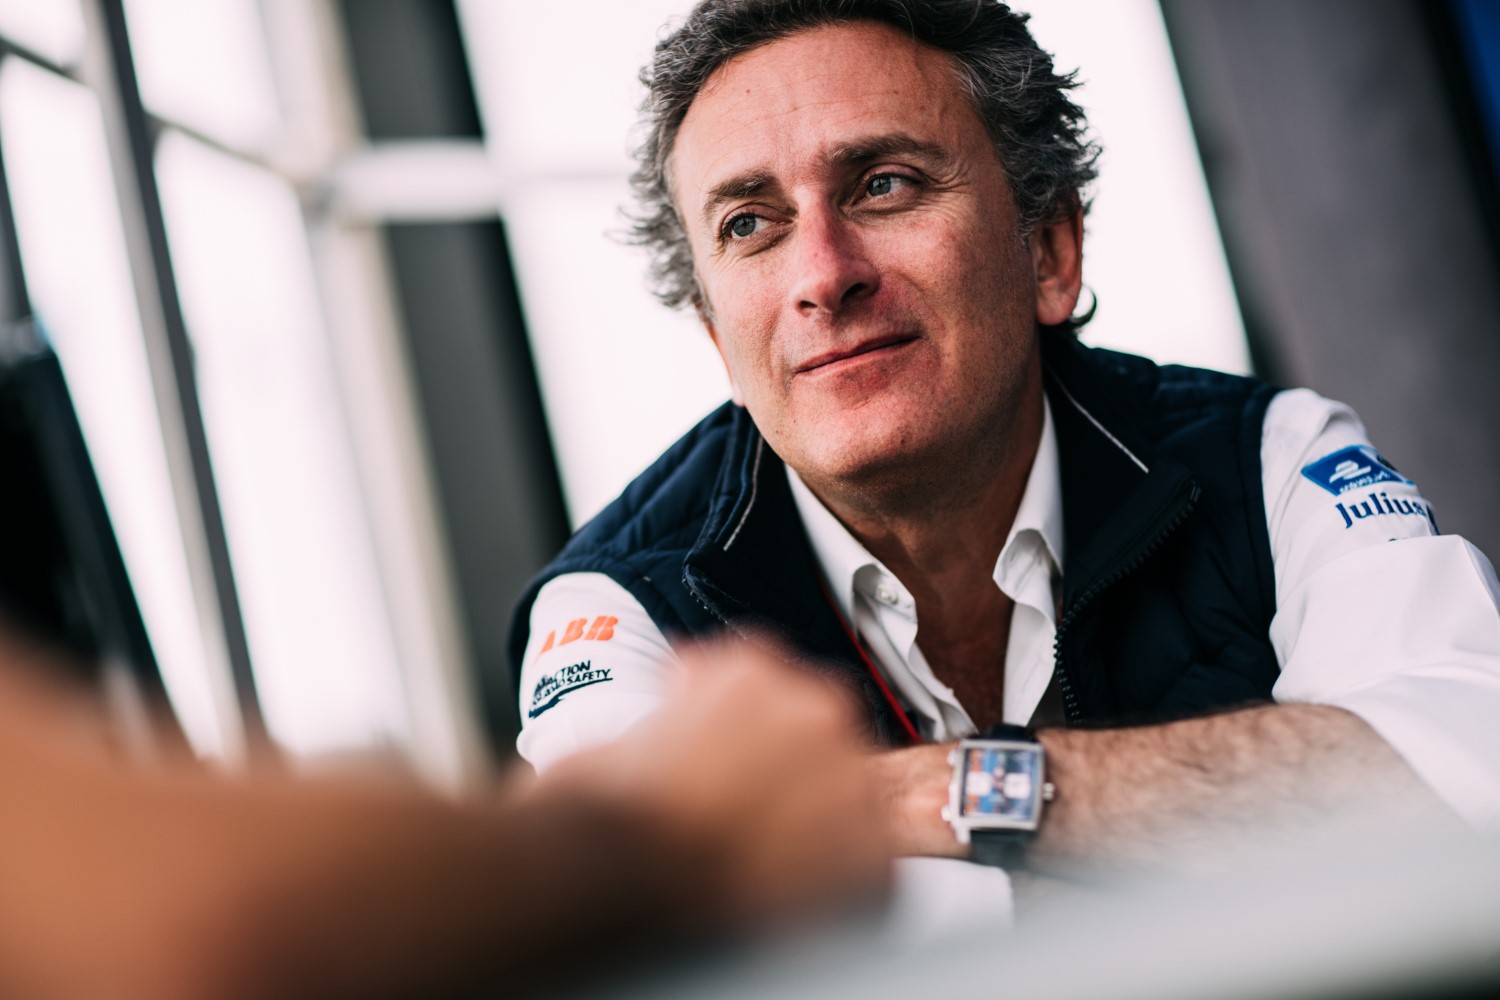 Budget caps, especially Agag's proposal of $75M will result in thousands of layoffs across F1